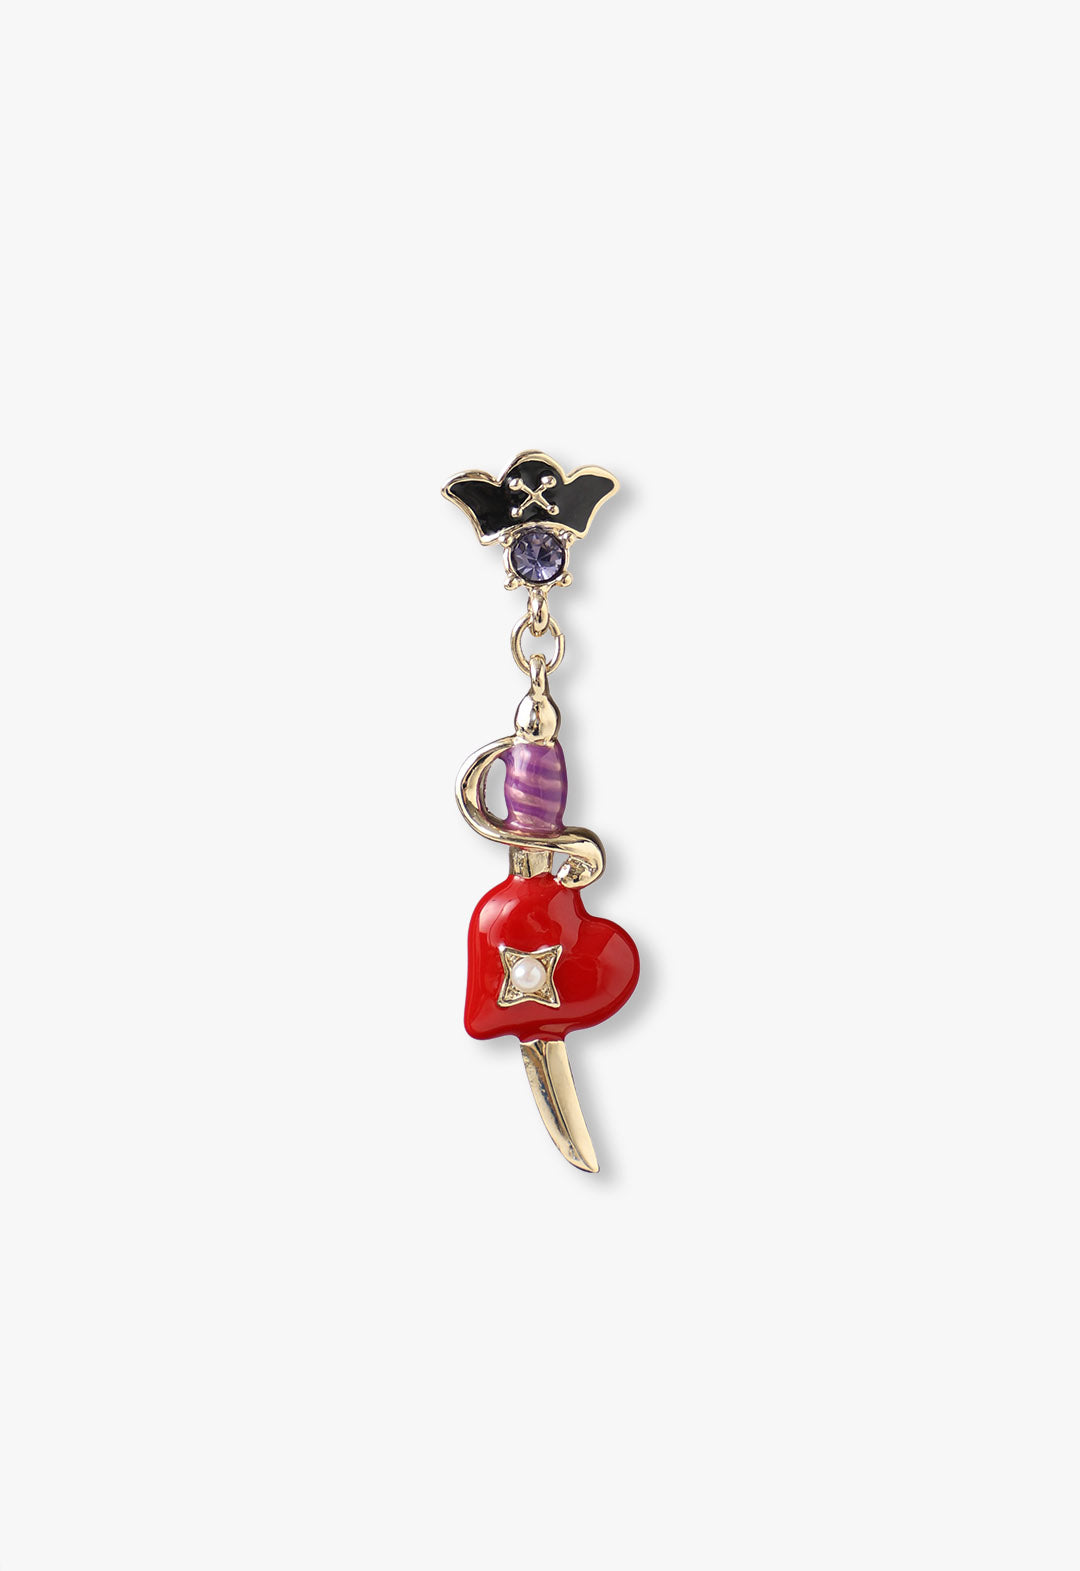 Skull Heart Earing Red, the other earing is a pirate saber with purple grip, with hat on top, red heart with a pearl star